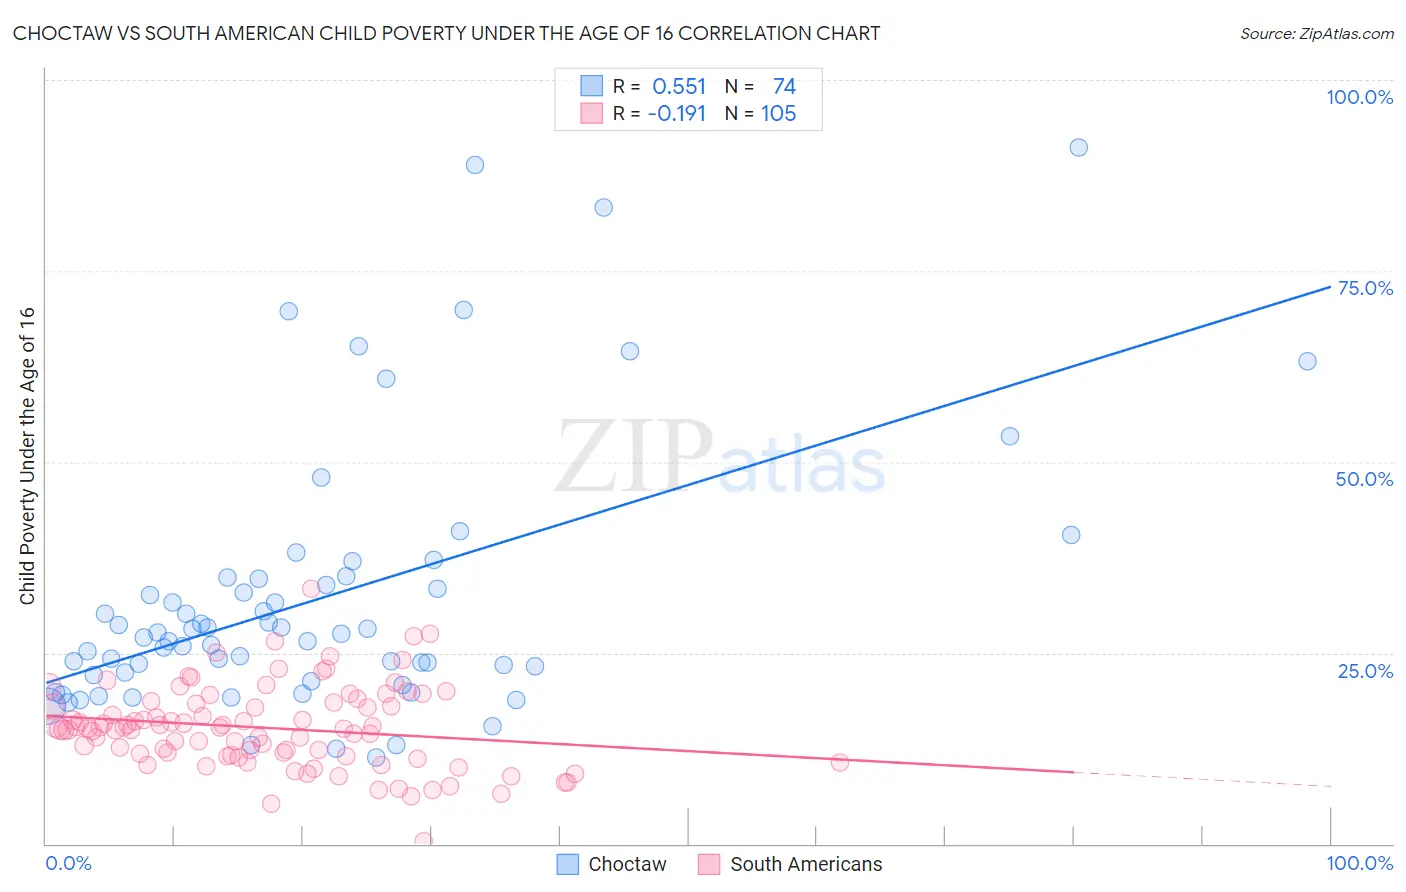 Choctaw vs South American Child Poverty Under the Age of 16